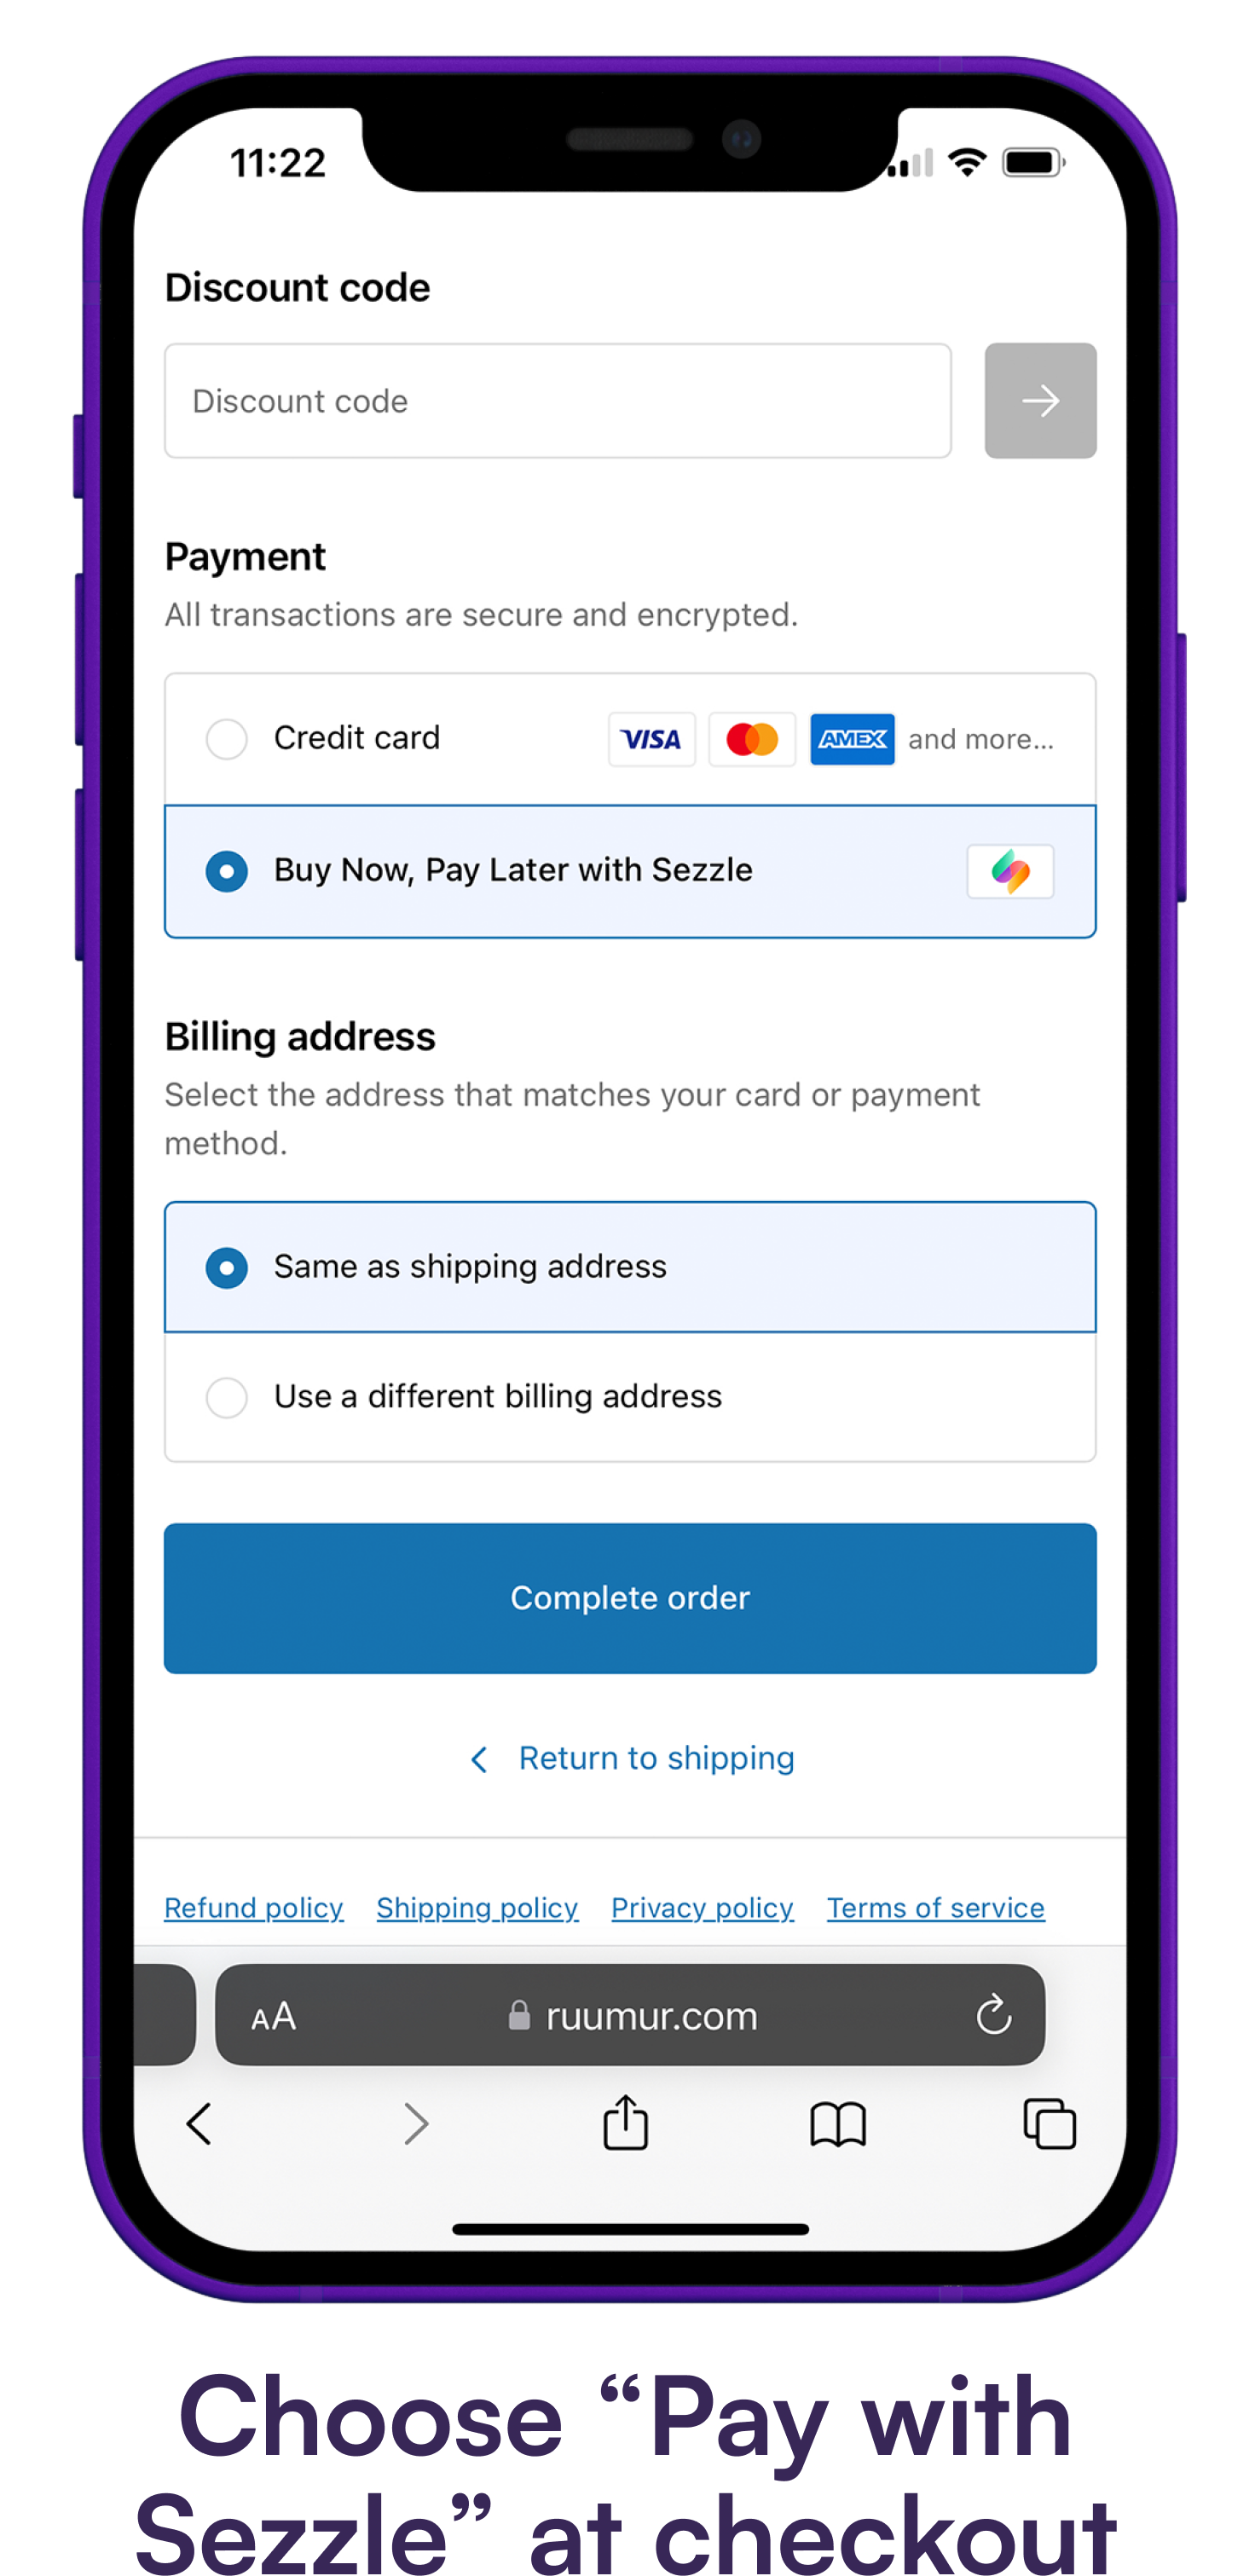 Phone screen showing Sezzle gateway option on a checkout page